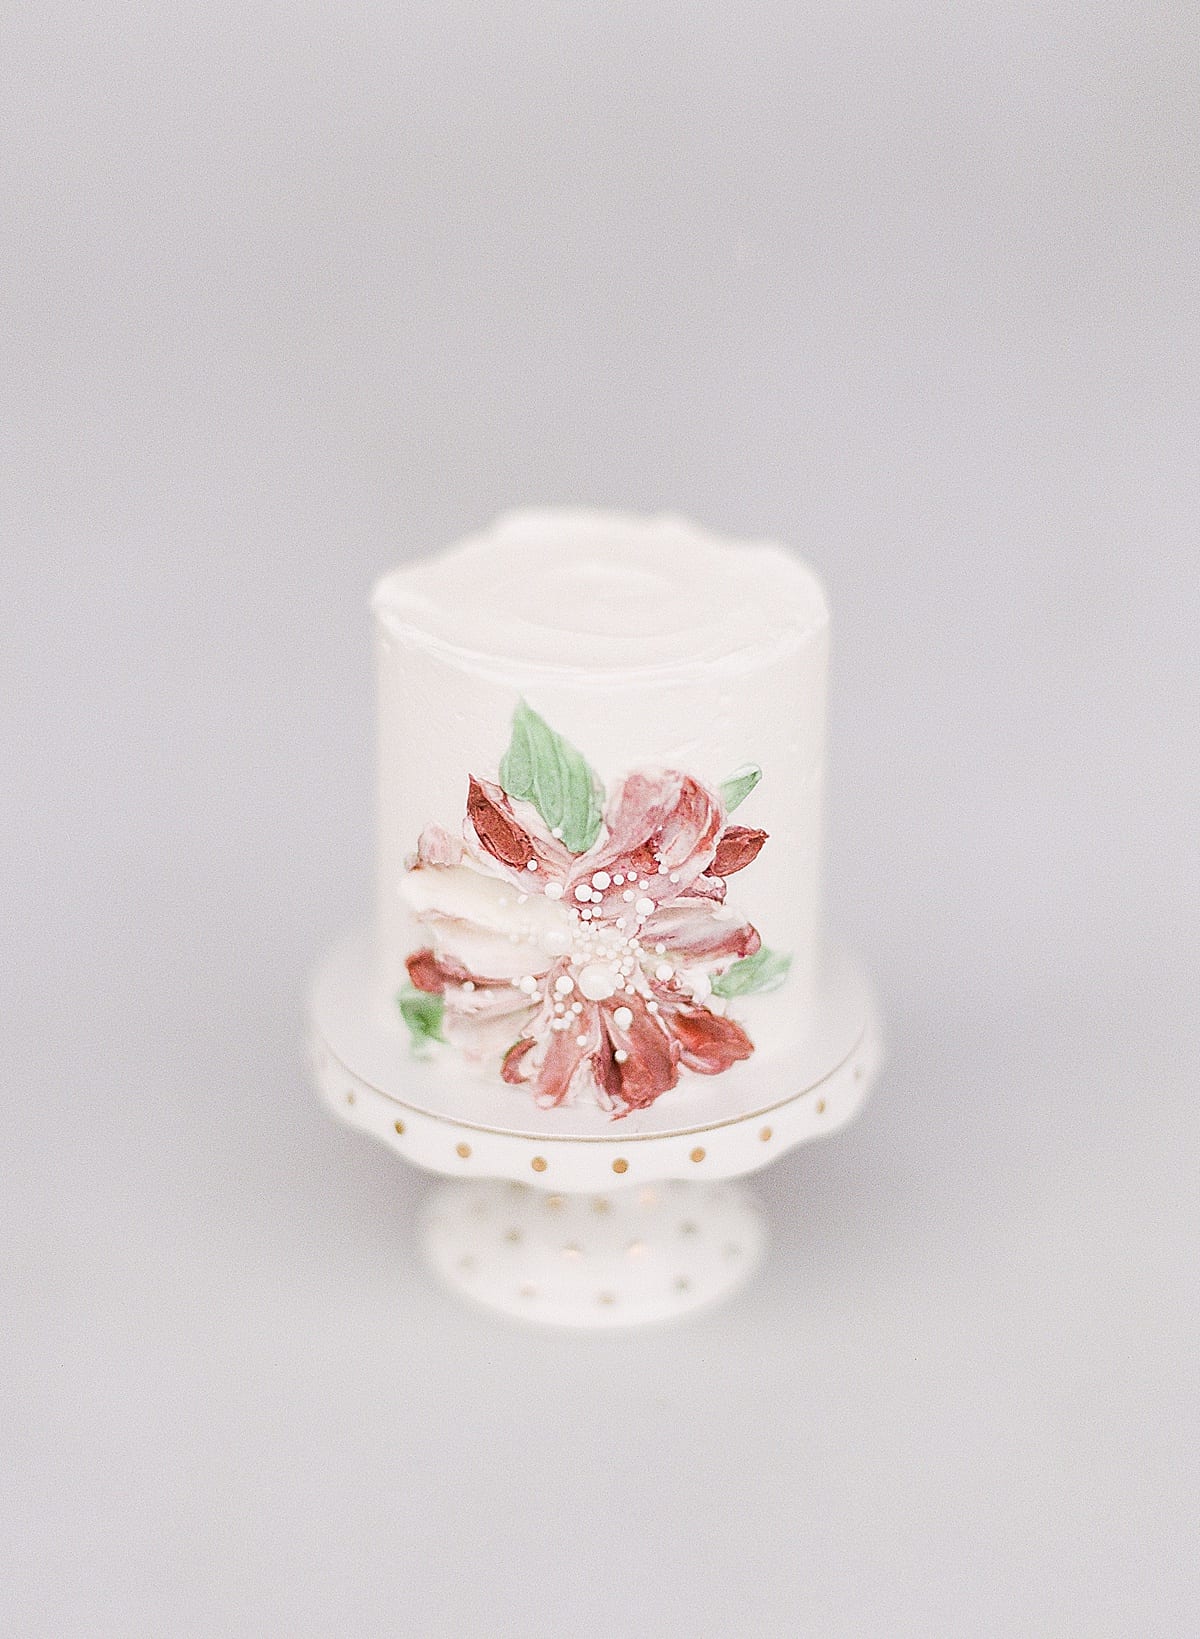 Small Cake with Red Flower Painted On Photo